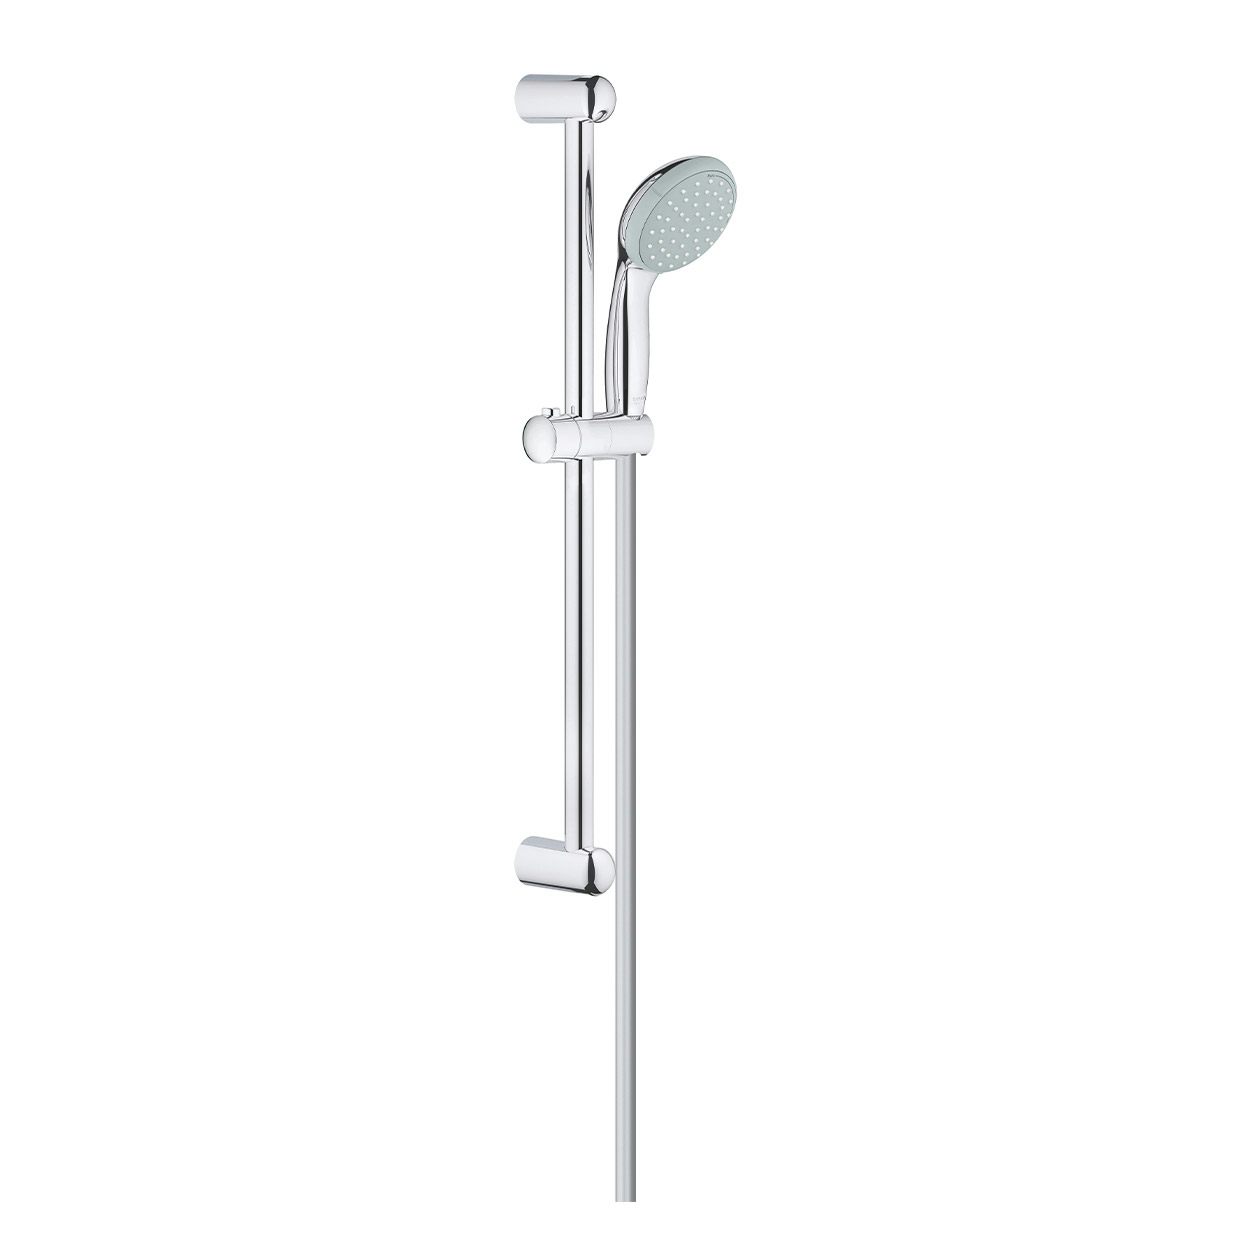 Grohe Grohtherm 800 thermostatic shower mixer with Tempesta 100 2 Spray shower rail set